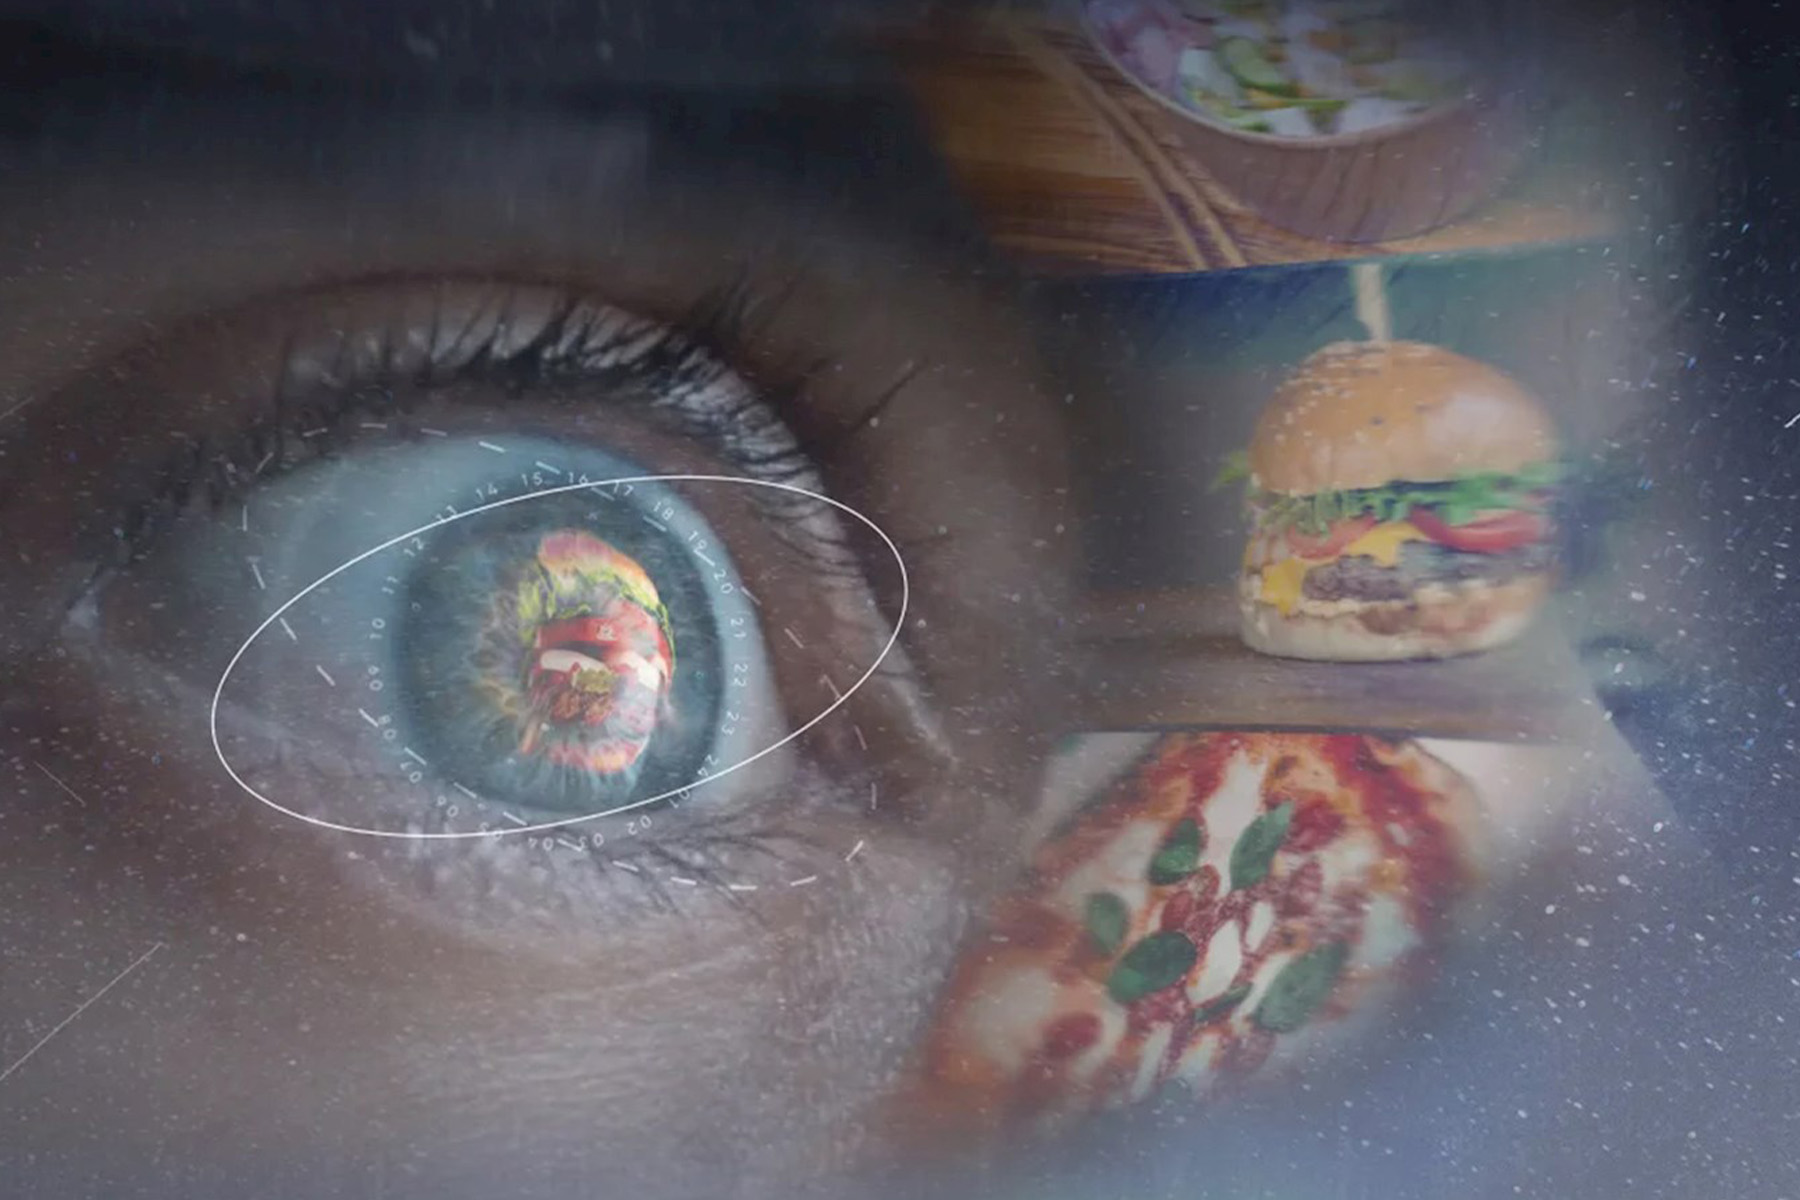 Close up of an eye reflecting  a pizza and burger in space